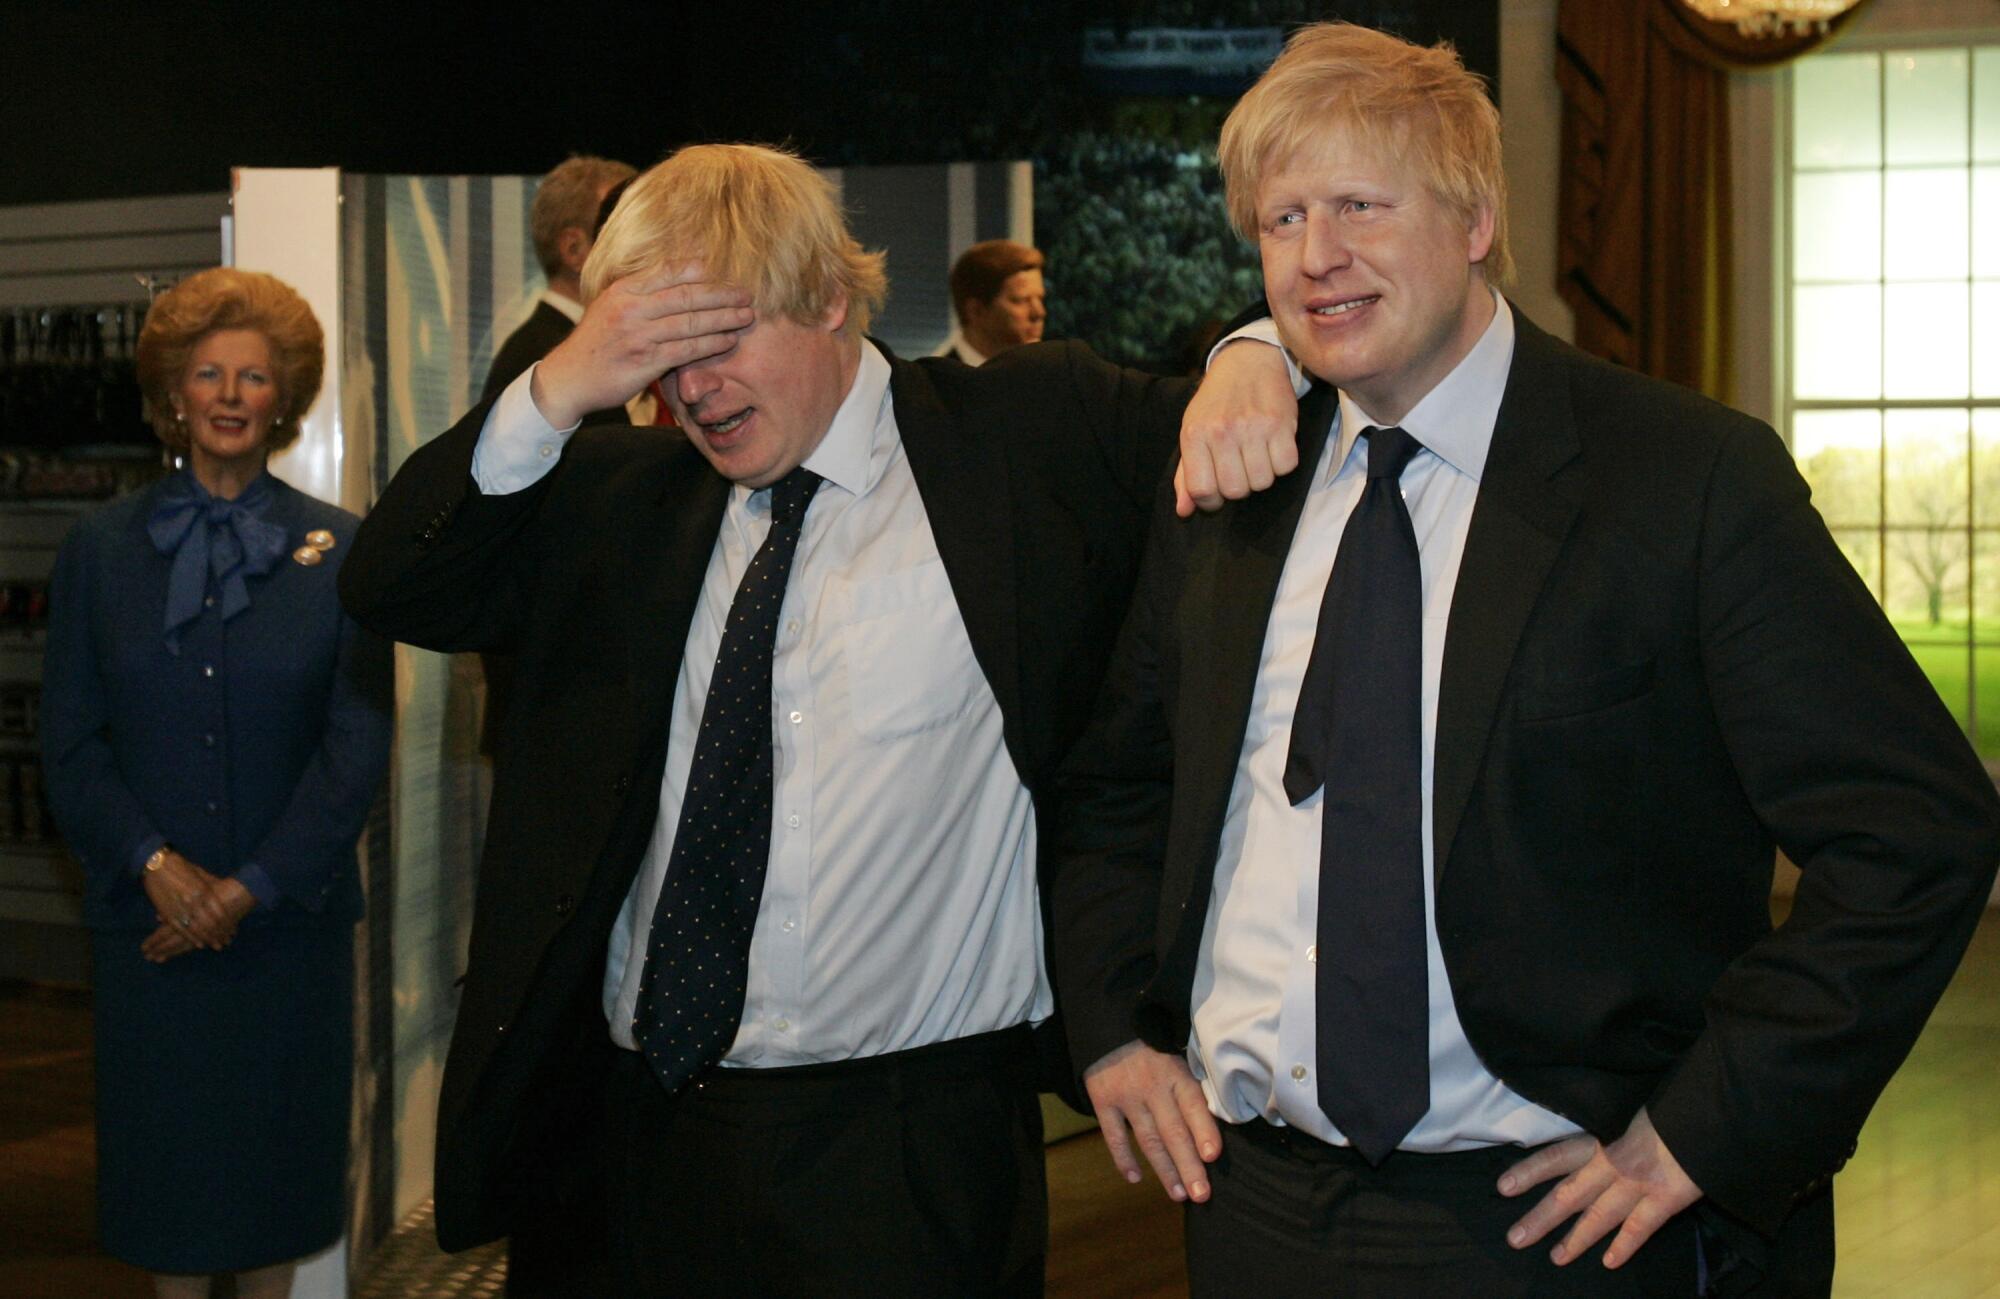 Then-Mayor Boris Johnson, left, poses with a wax figure of himself at Madame Tussauds wax museum in London in 2009.